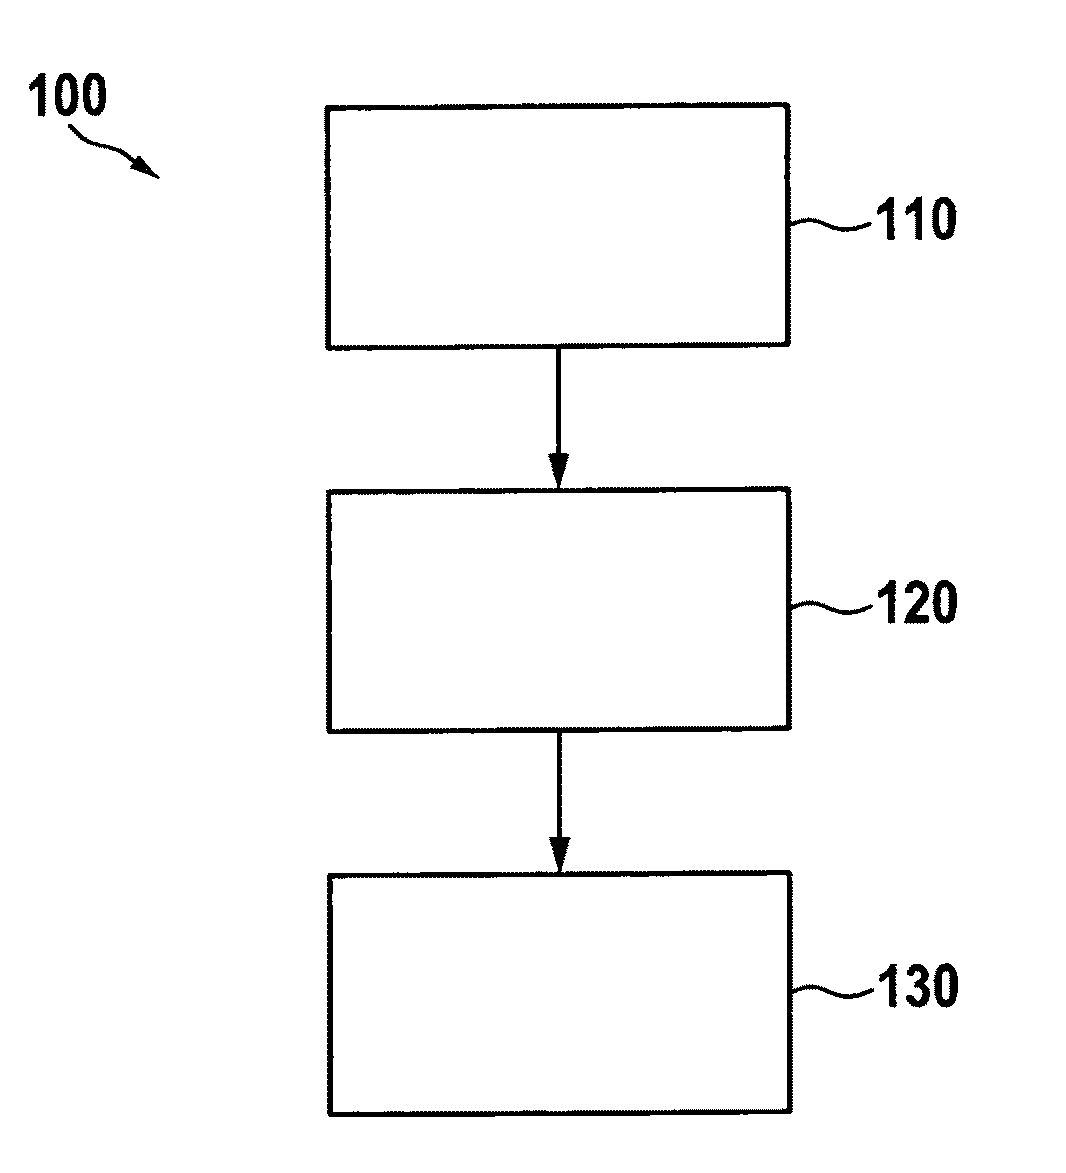 Method and device for detecting an interfering object in a camera image